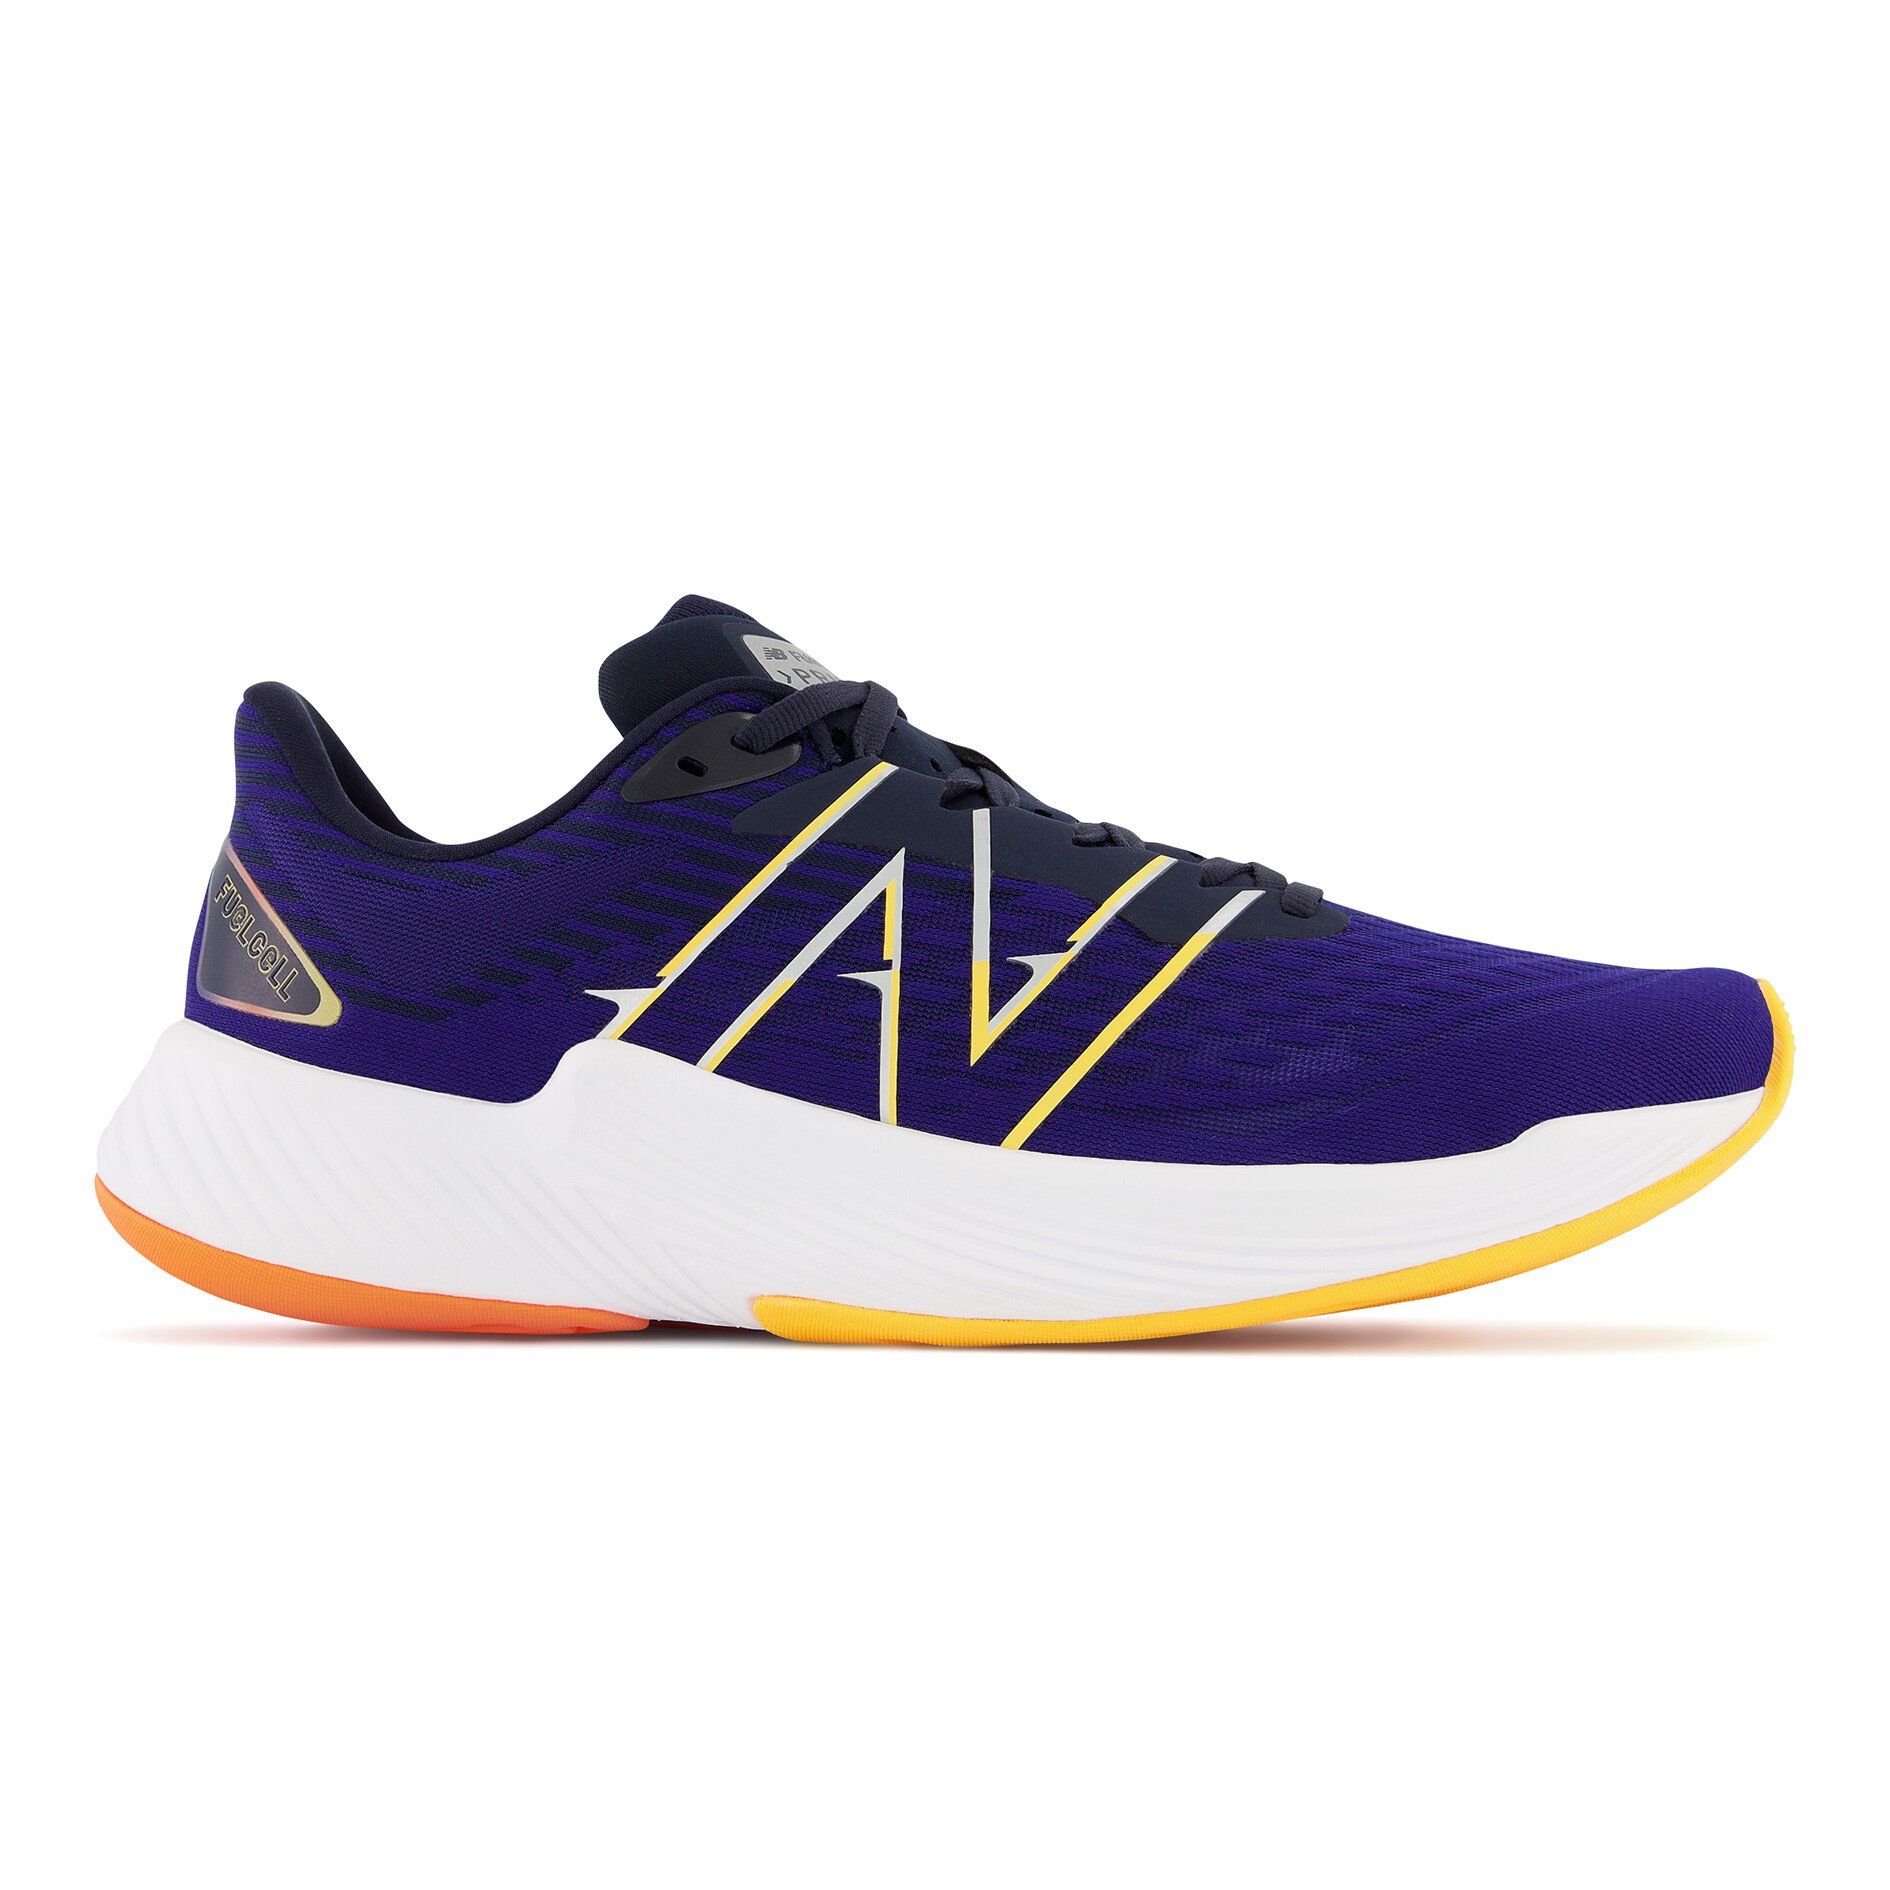 New Balance - MFCPZCN2 Fuel Cell Prism v2